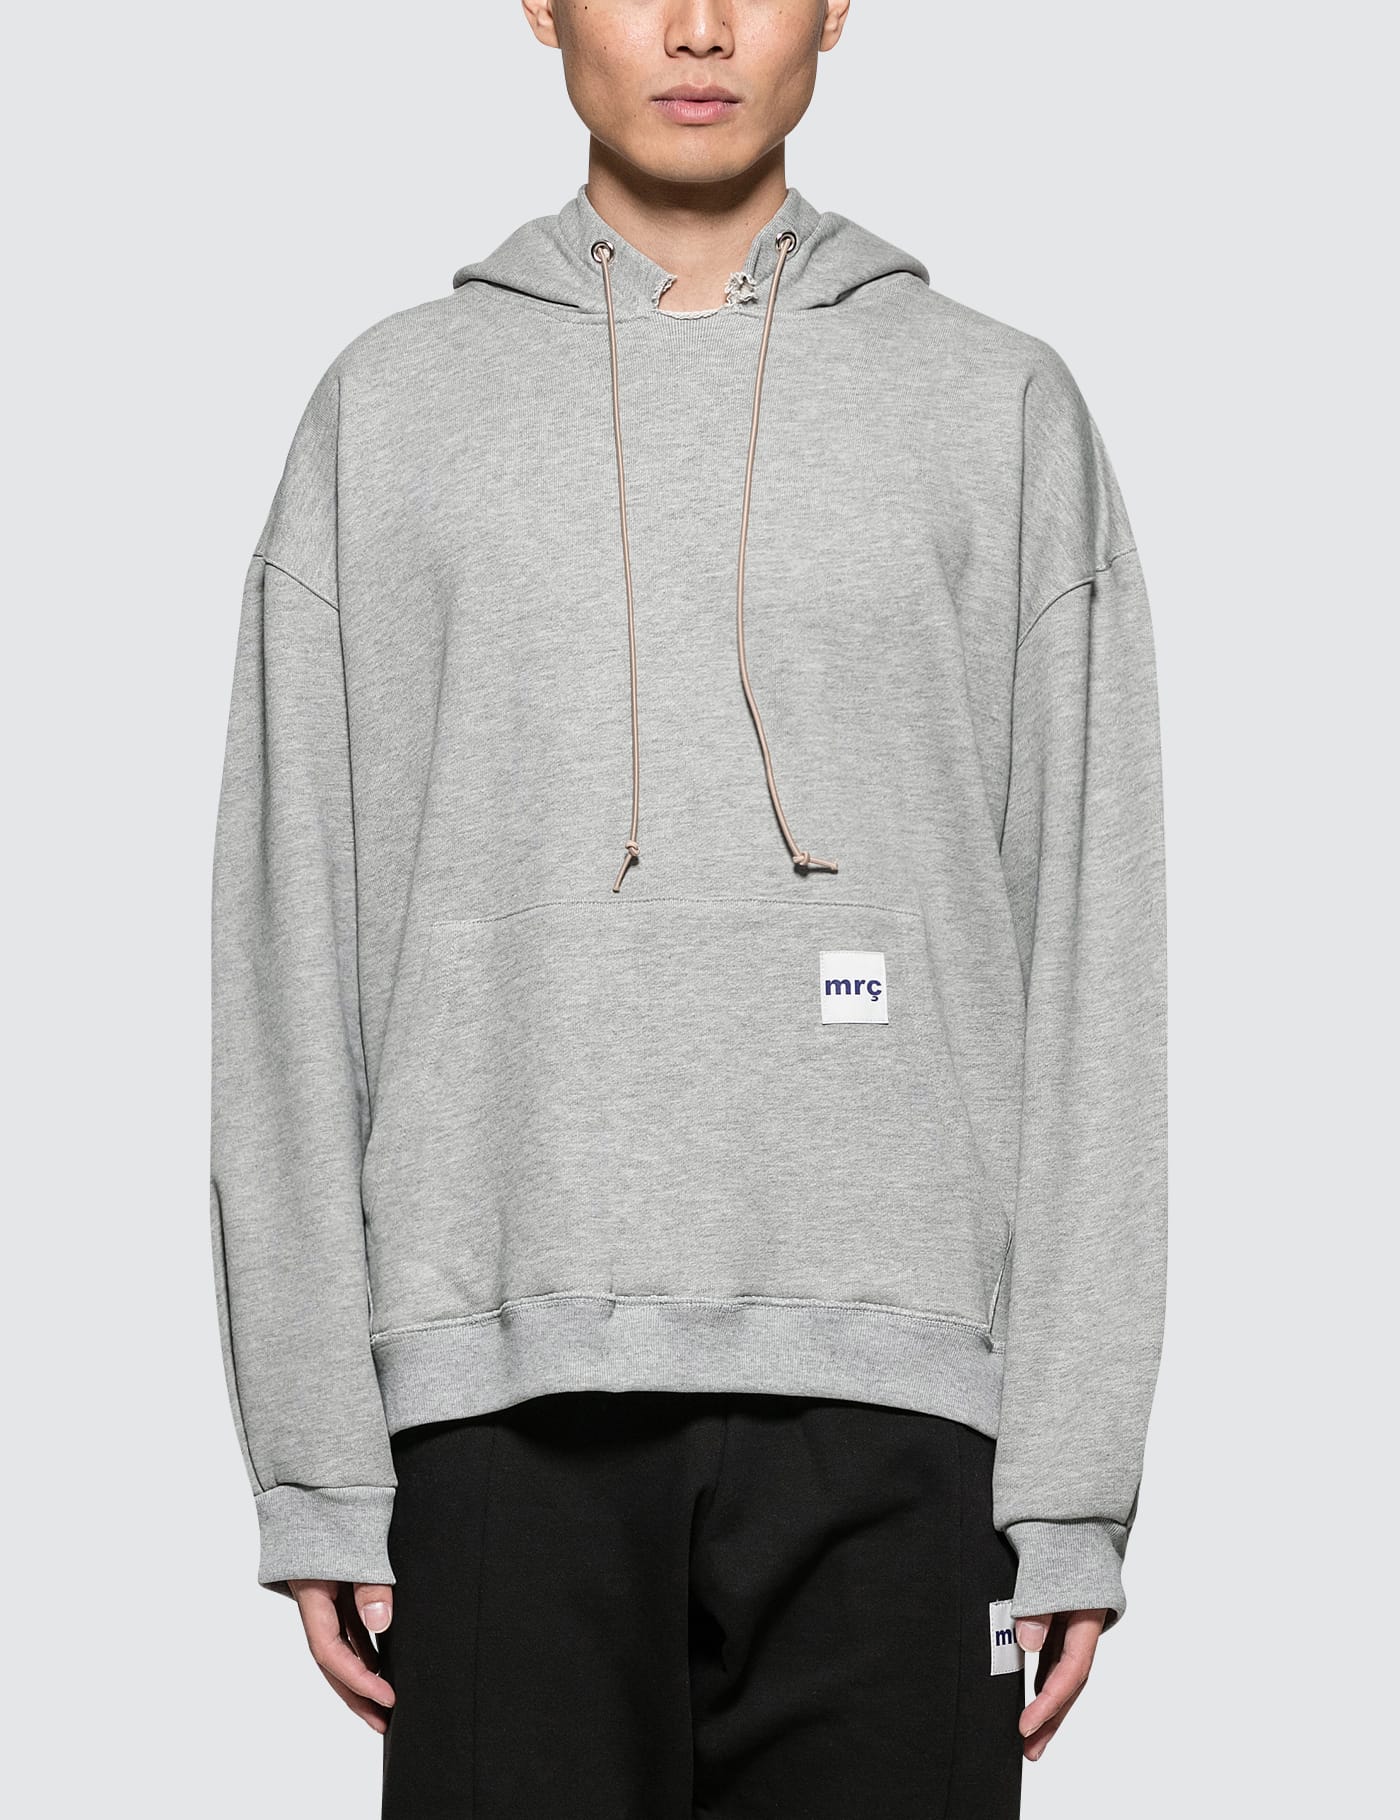 Mr. Completely - Factory Hoodie | HBX - Globally Curated Fashion